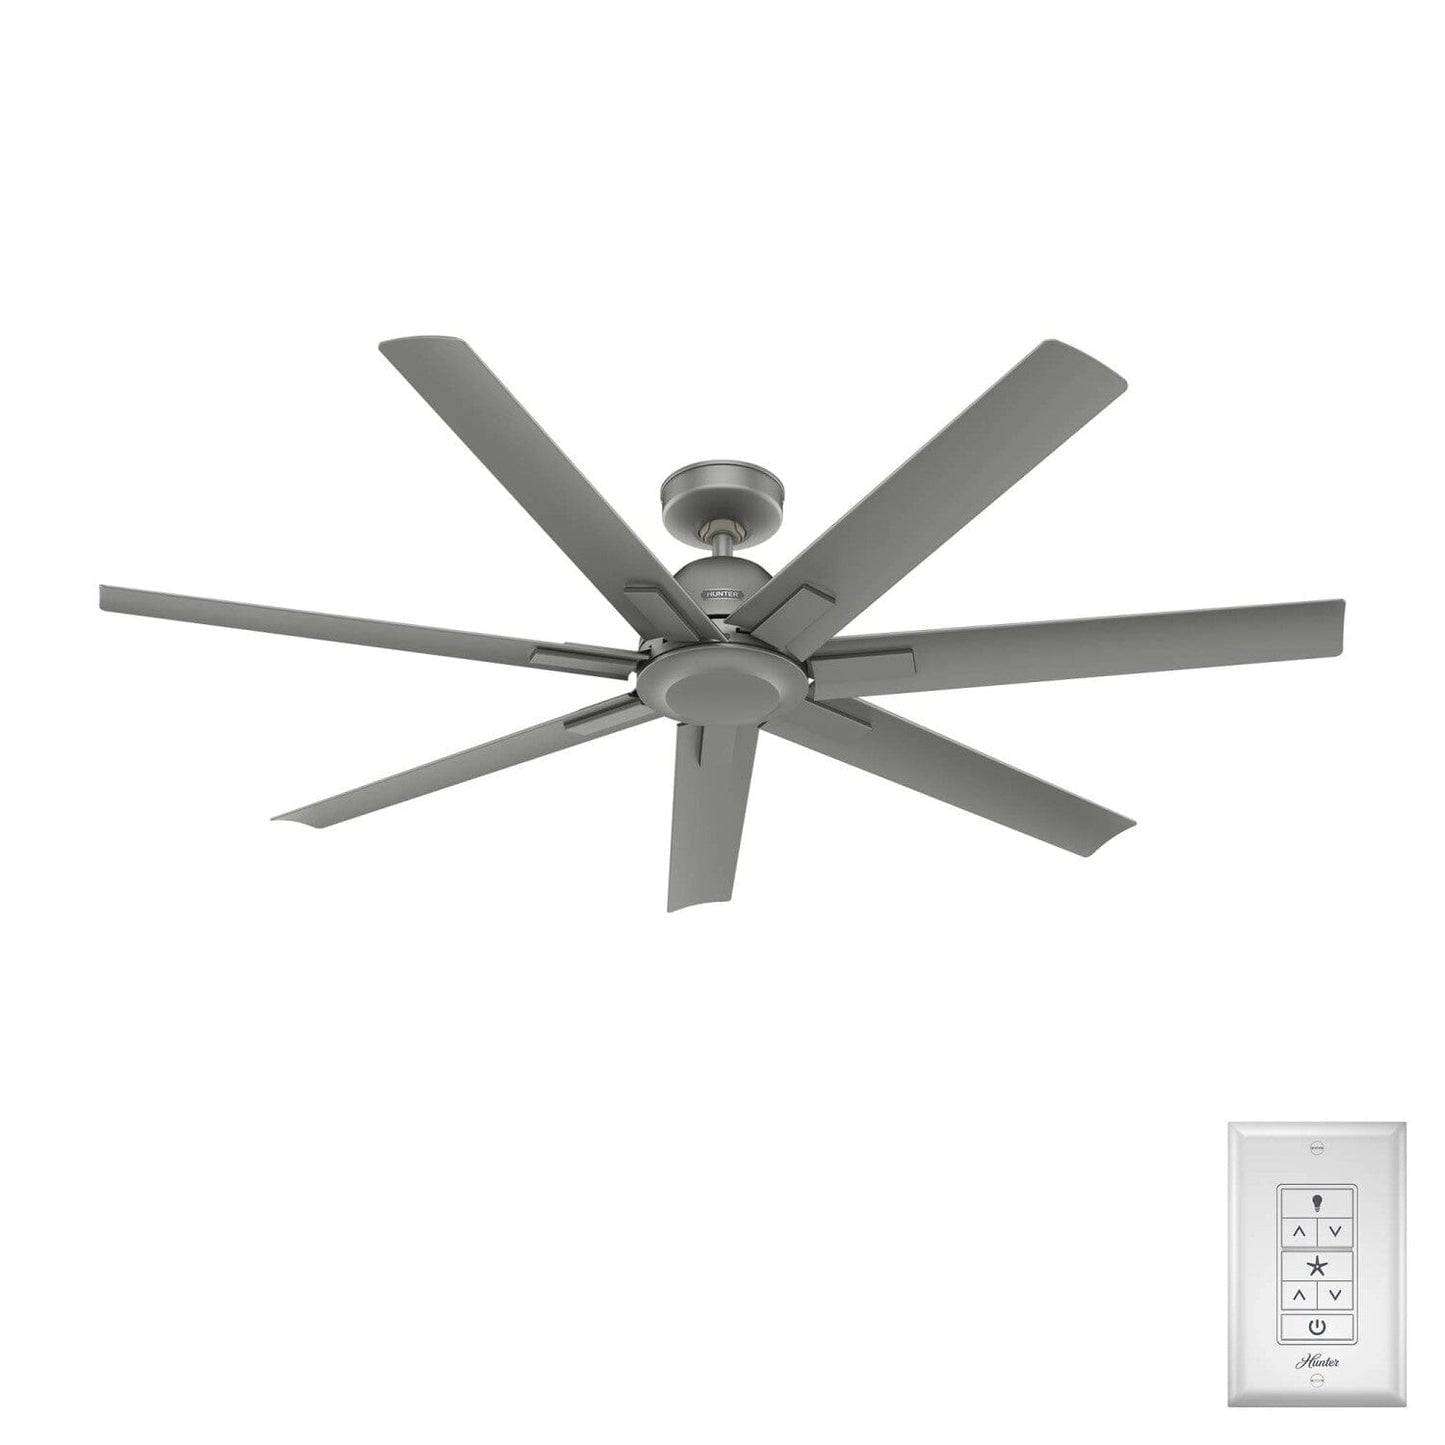 Downtown Outdoor ENERGY STAR 60 inch Ceiling Fans Hunter Matte Silver - Matte Silver 